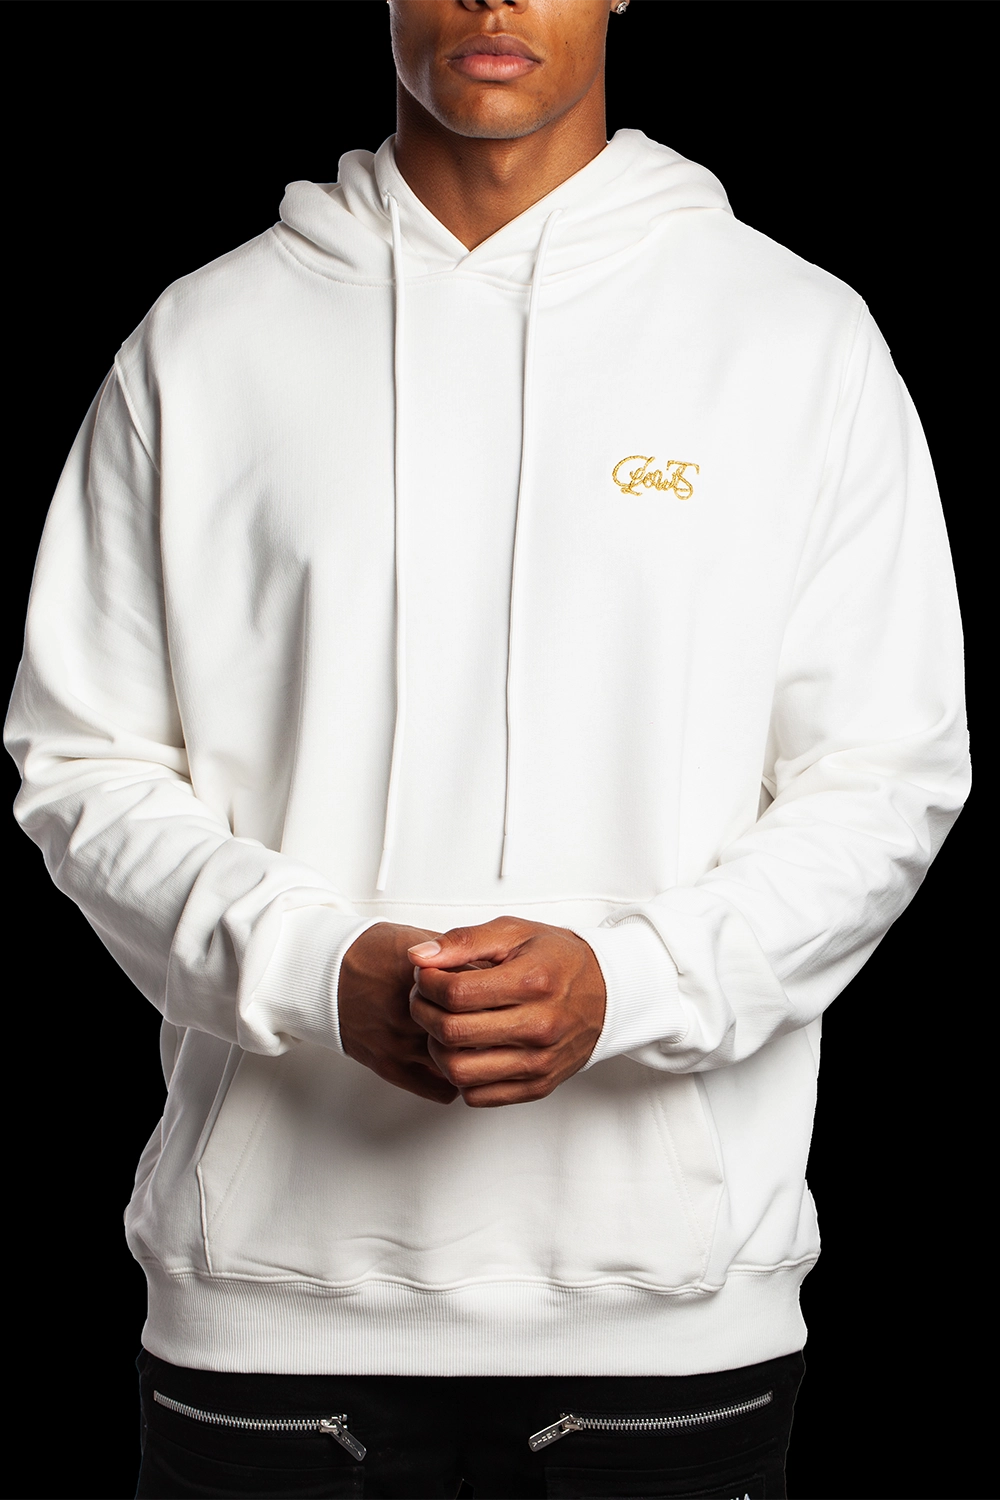 Premium White Hoodie embroidered with the worlds finest Piana Clerico 24-carat gold thread- made exclusively in Italy designed in Ireland